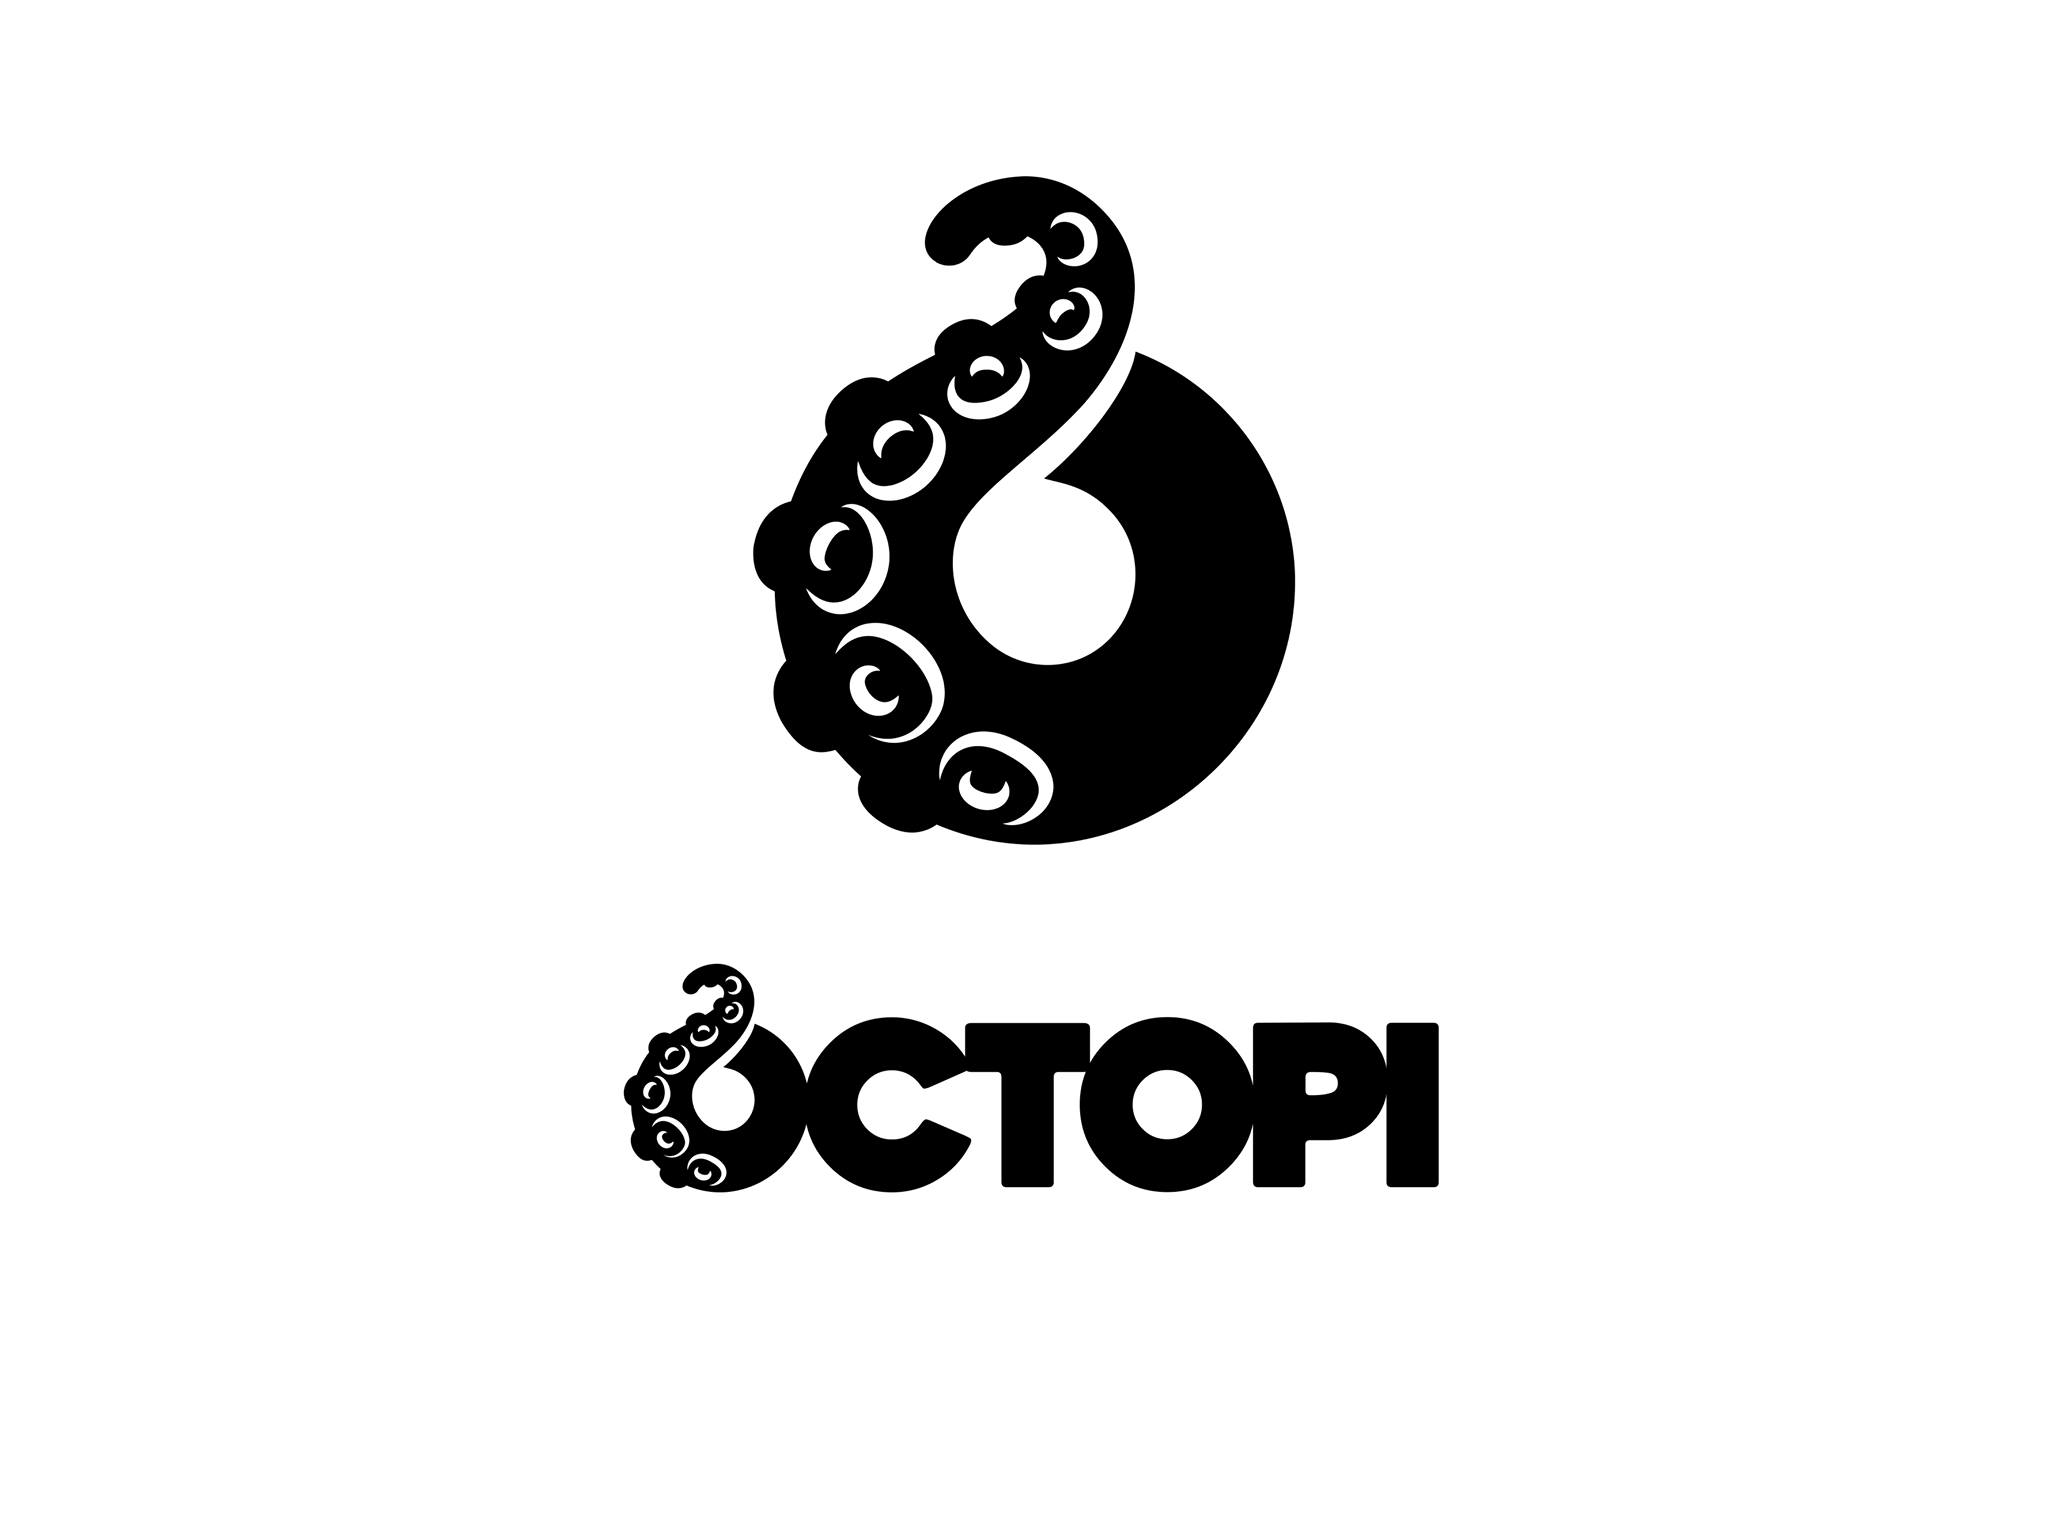 Logo of Octopi Brewing brewery